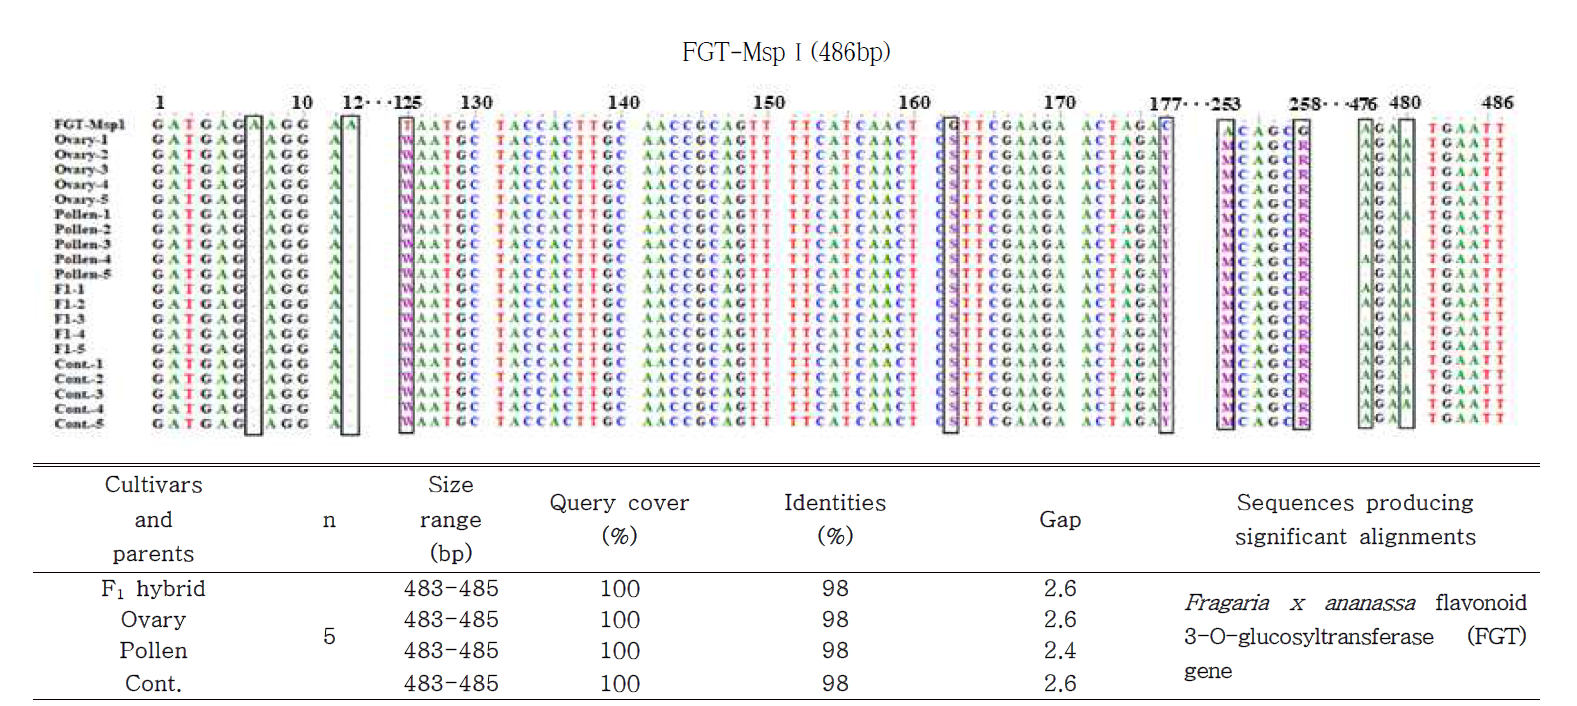 Similarity analysis of nucleotide sequencing between F1 hybrid cultivar, parent plants and FGT-MspⅠ marker. The perfect matches are marked by dot. F1 : F1 hybrid (‘Seeberry’), Ovary (‘Wongyo3115’), Pollen (‘Wongyo3116’), Cont. : ‘Seolhyong’. A : Adenosine, C: Cytidine, G: Guanosine, T: Thymidine, R: A or G, Y: C or T, M; A or C, S: G or C(strong-3H bonds), W: A or T(Weak-2 H bonds)